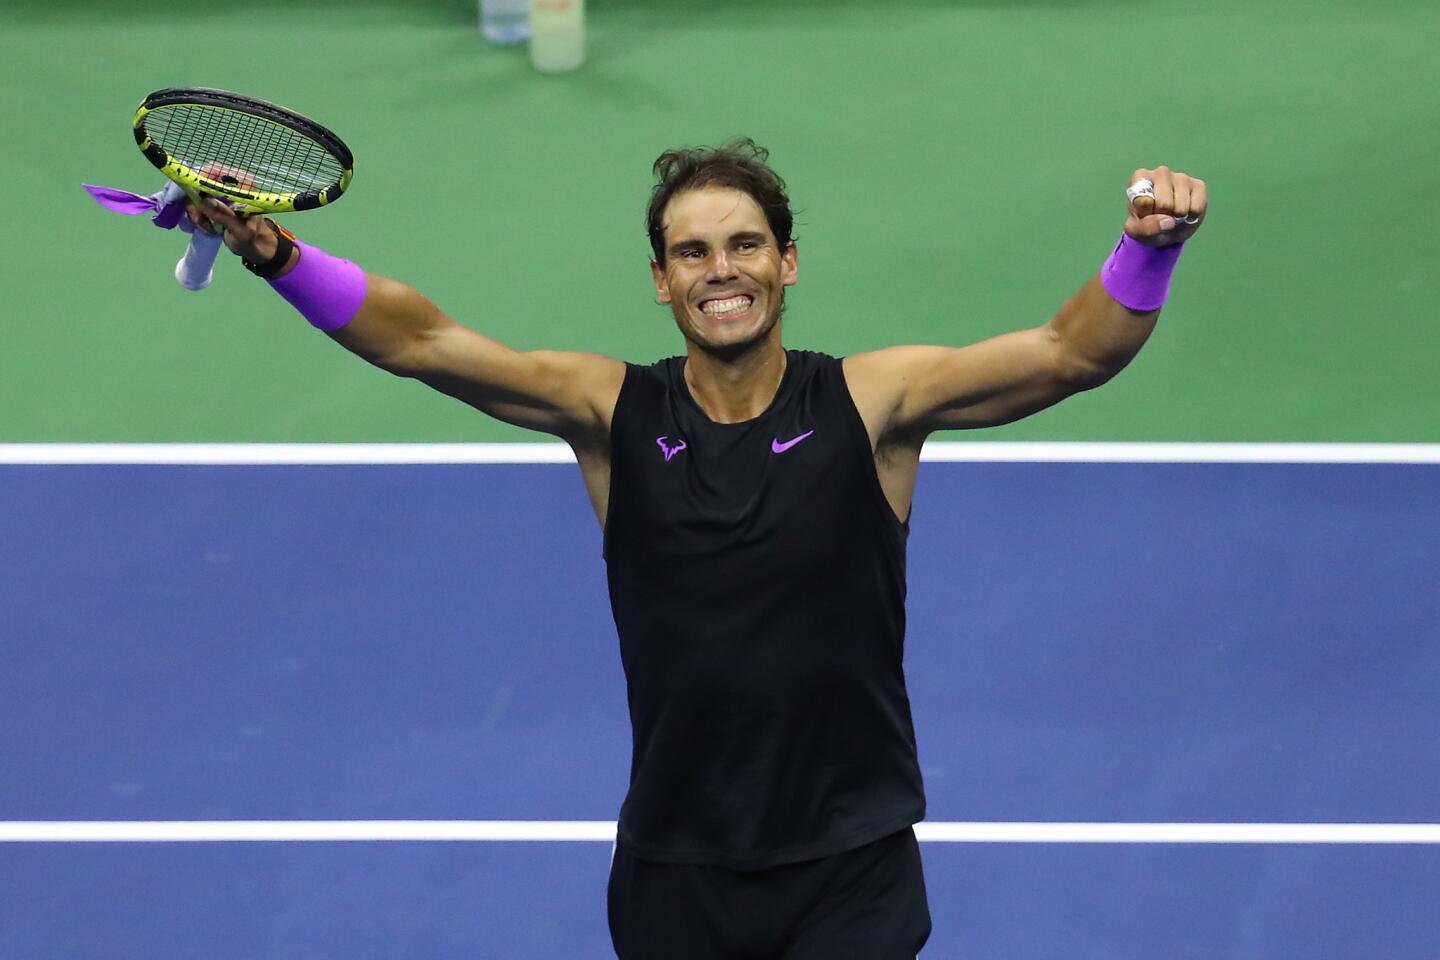 Rafael Nadal celebrates after winning his Men's Singles semifinal match against Matteo Berrettini inside the Billie Jean King National Tennis Center on Sept. 6, 2019, in Queens.